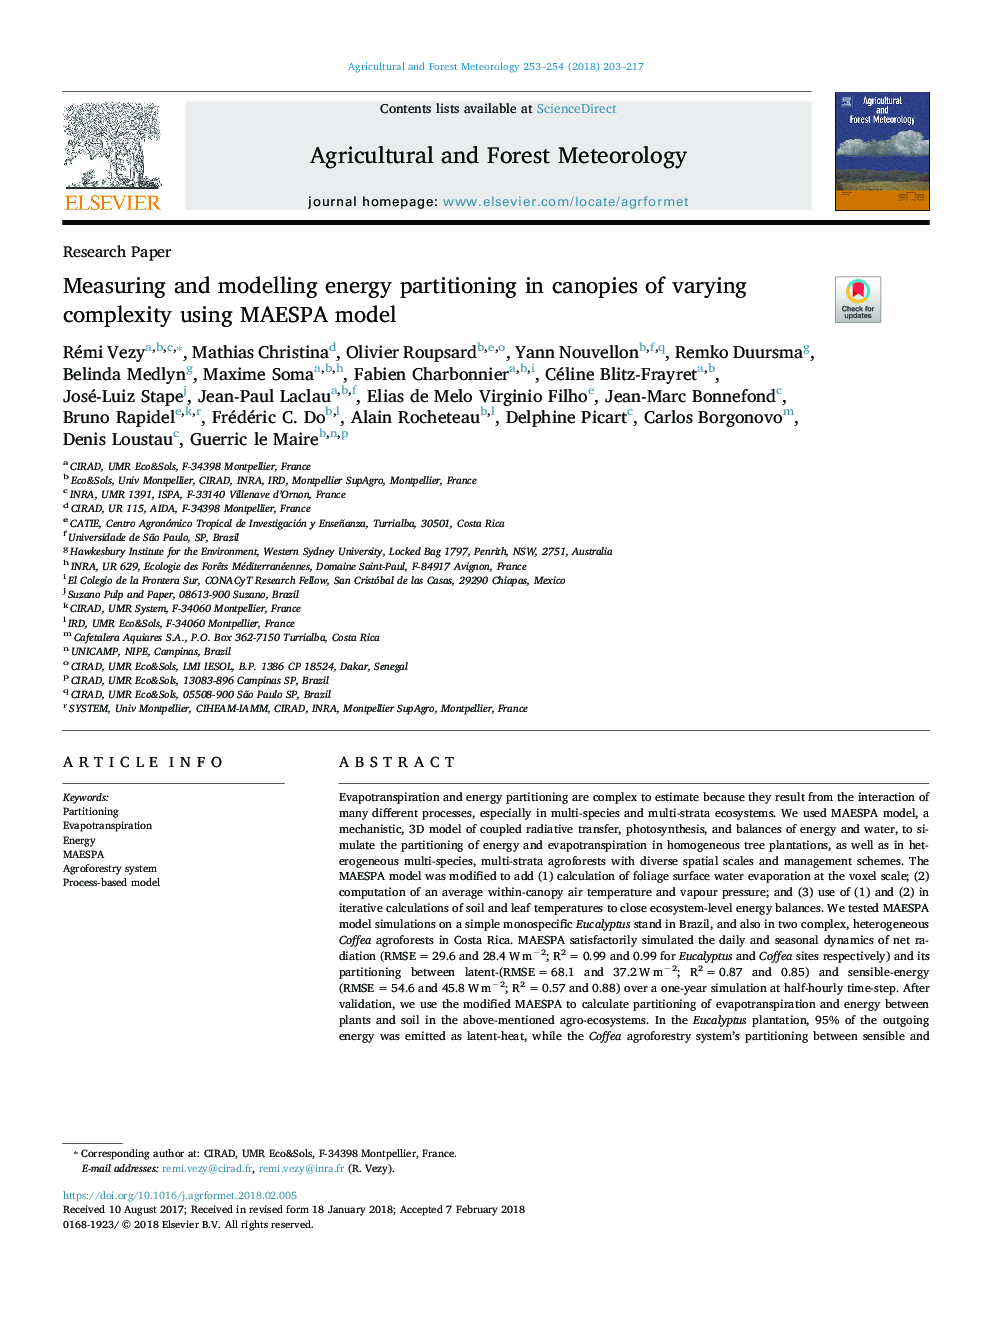 Measuring and modelling energy partitioning in canopies of varying complexity using MAESPA model